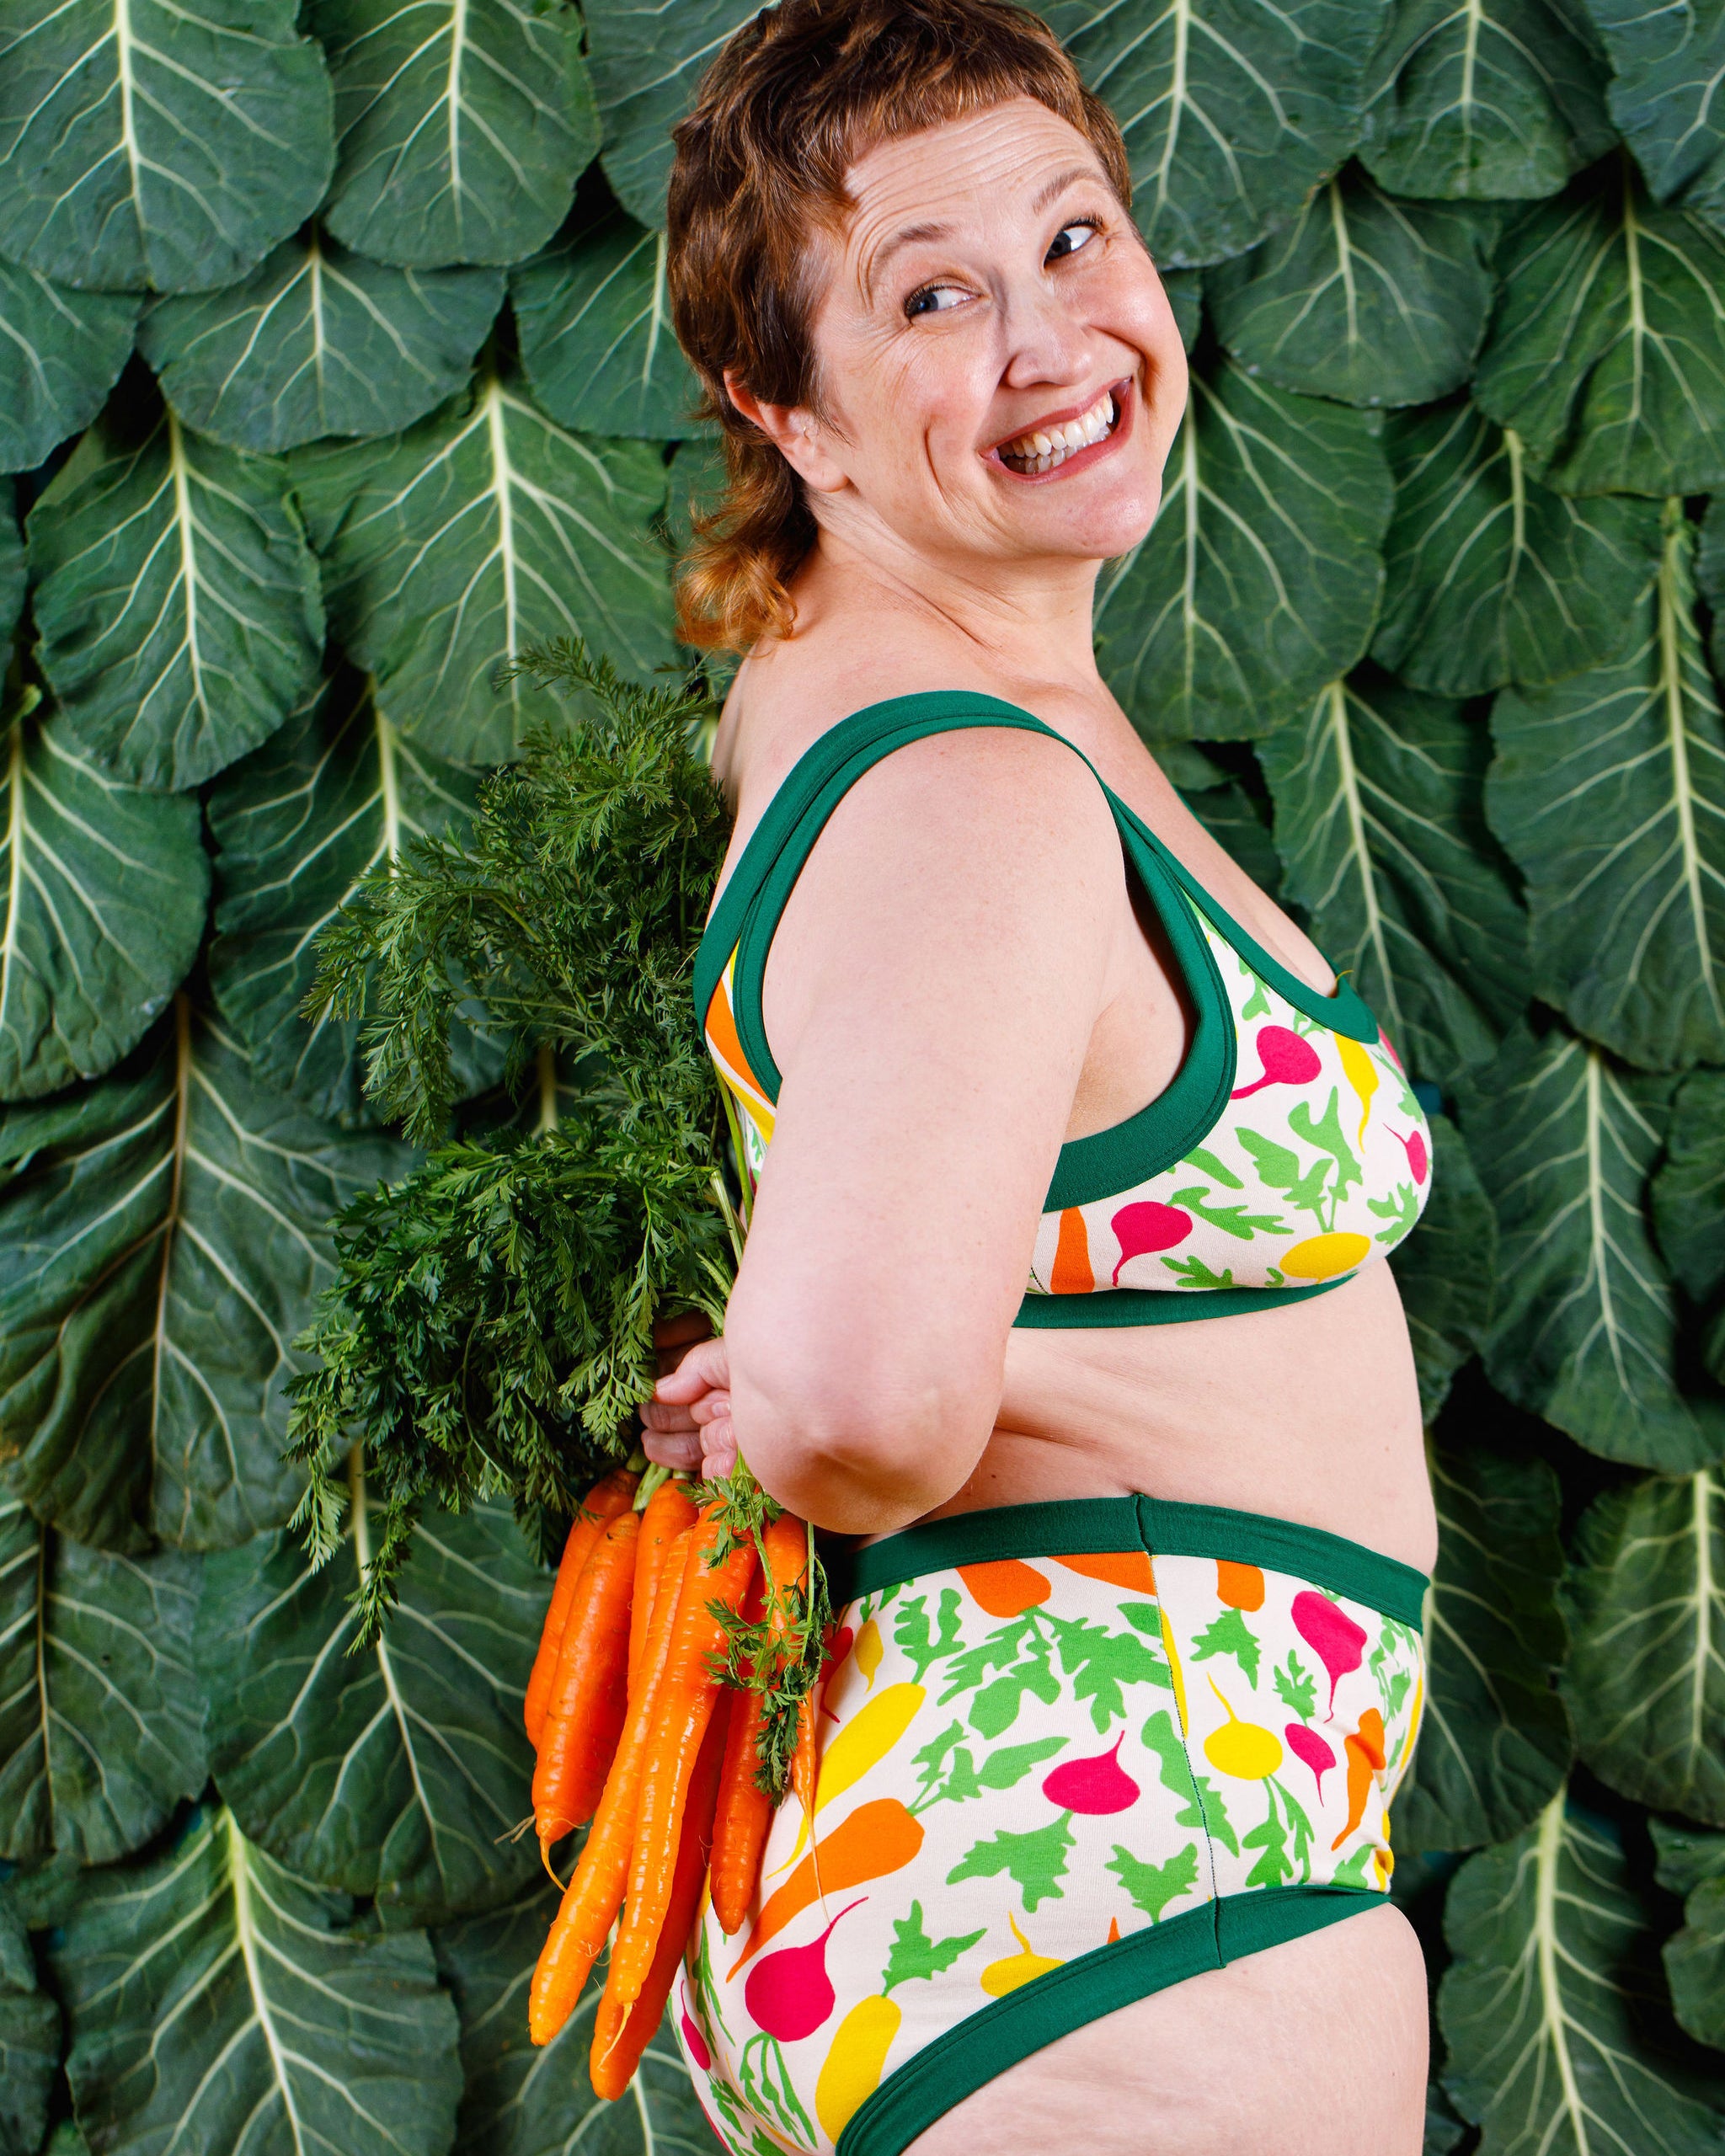 Model smiling wearing Thunderants Original style underwear and matching Bralette in Root Veggies print - yellow, orange, pink, and green vegetables.